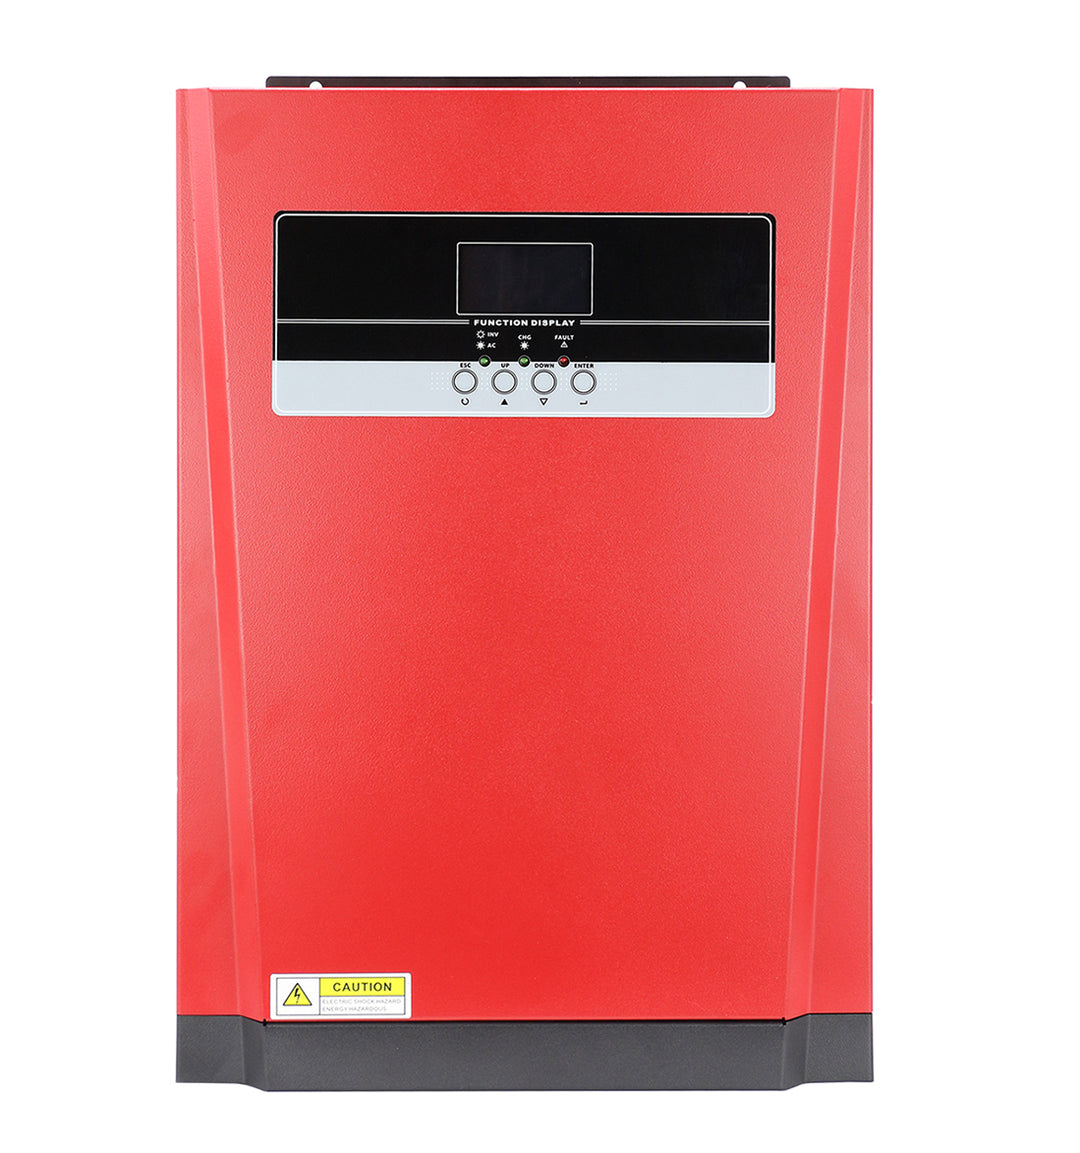 3.2Kw 24Vdc 230Vac Inverter Charger work without batteries (VM-3Kva) - VM Series - PowMr - Inverter Charger China Inc.